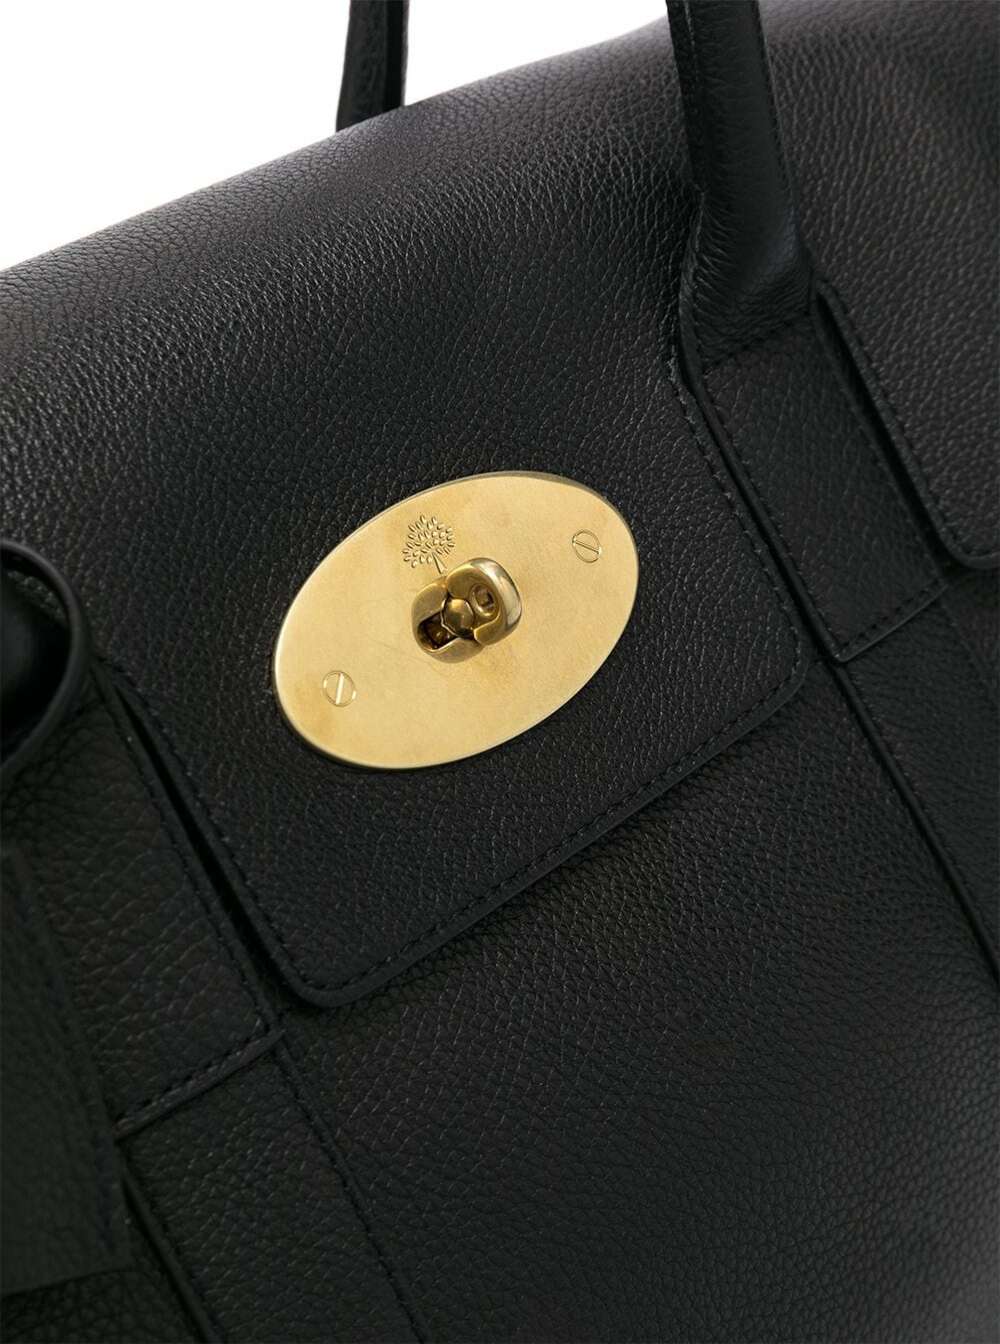 Shop Mulberry Bayswater Black Handbag With Twist-lock Fastening In Grainy Leather Woman